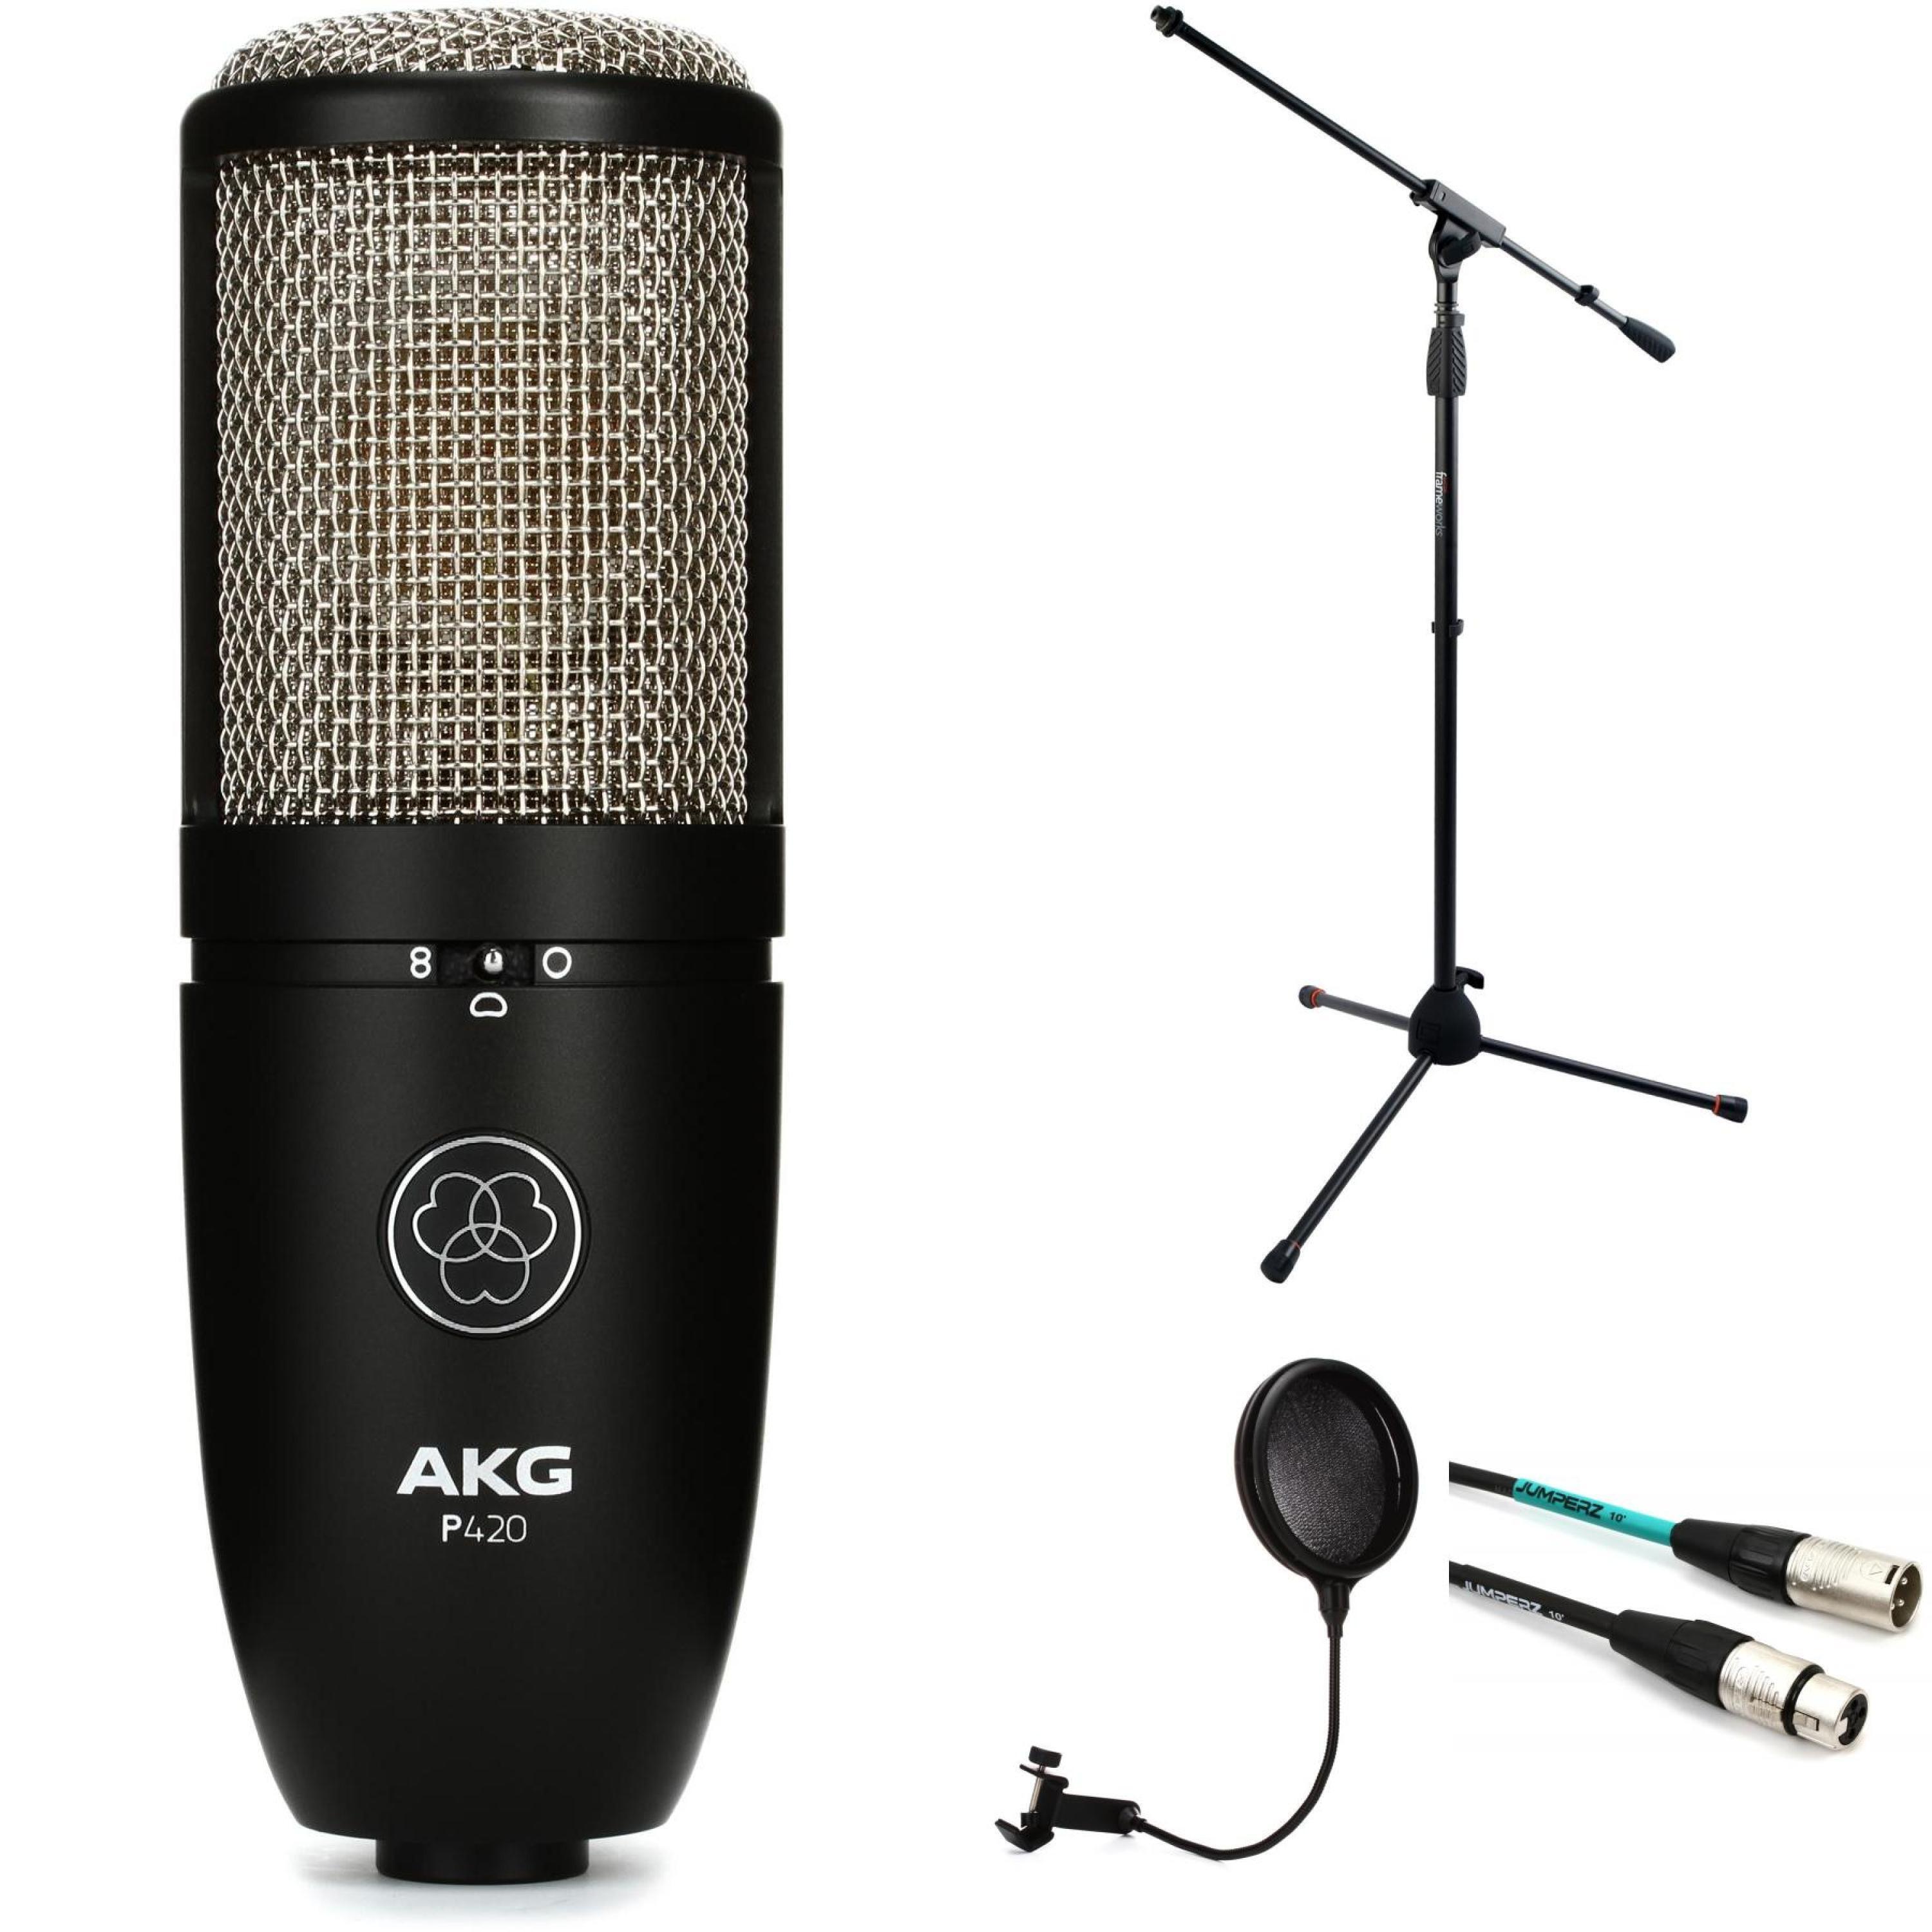 AKG P420 Large-Diaphragm Condenser Microphone Bundle with Stand, Pop Filte,  and Cable